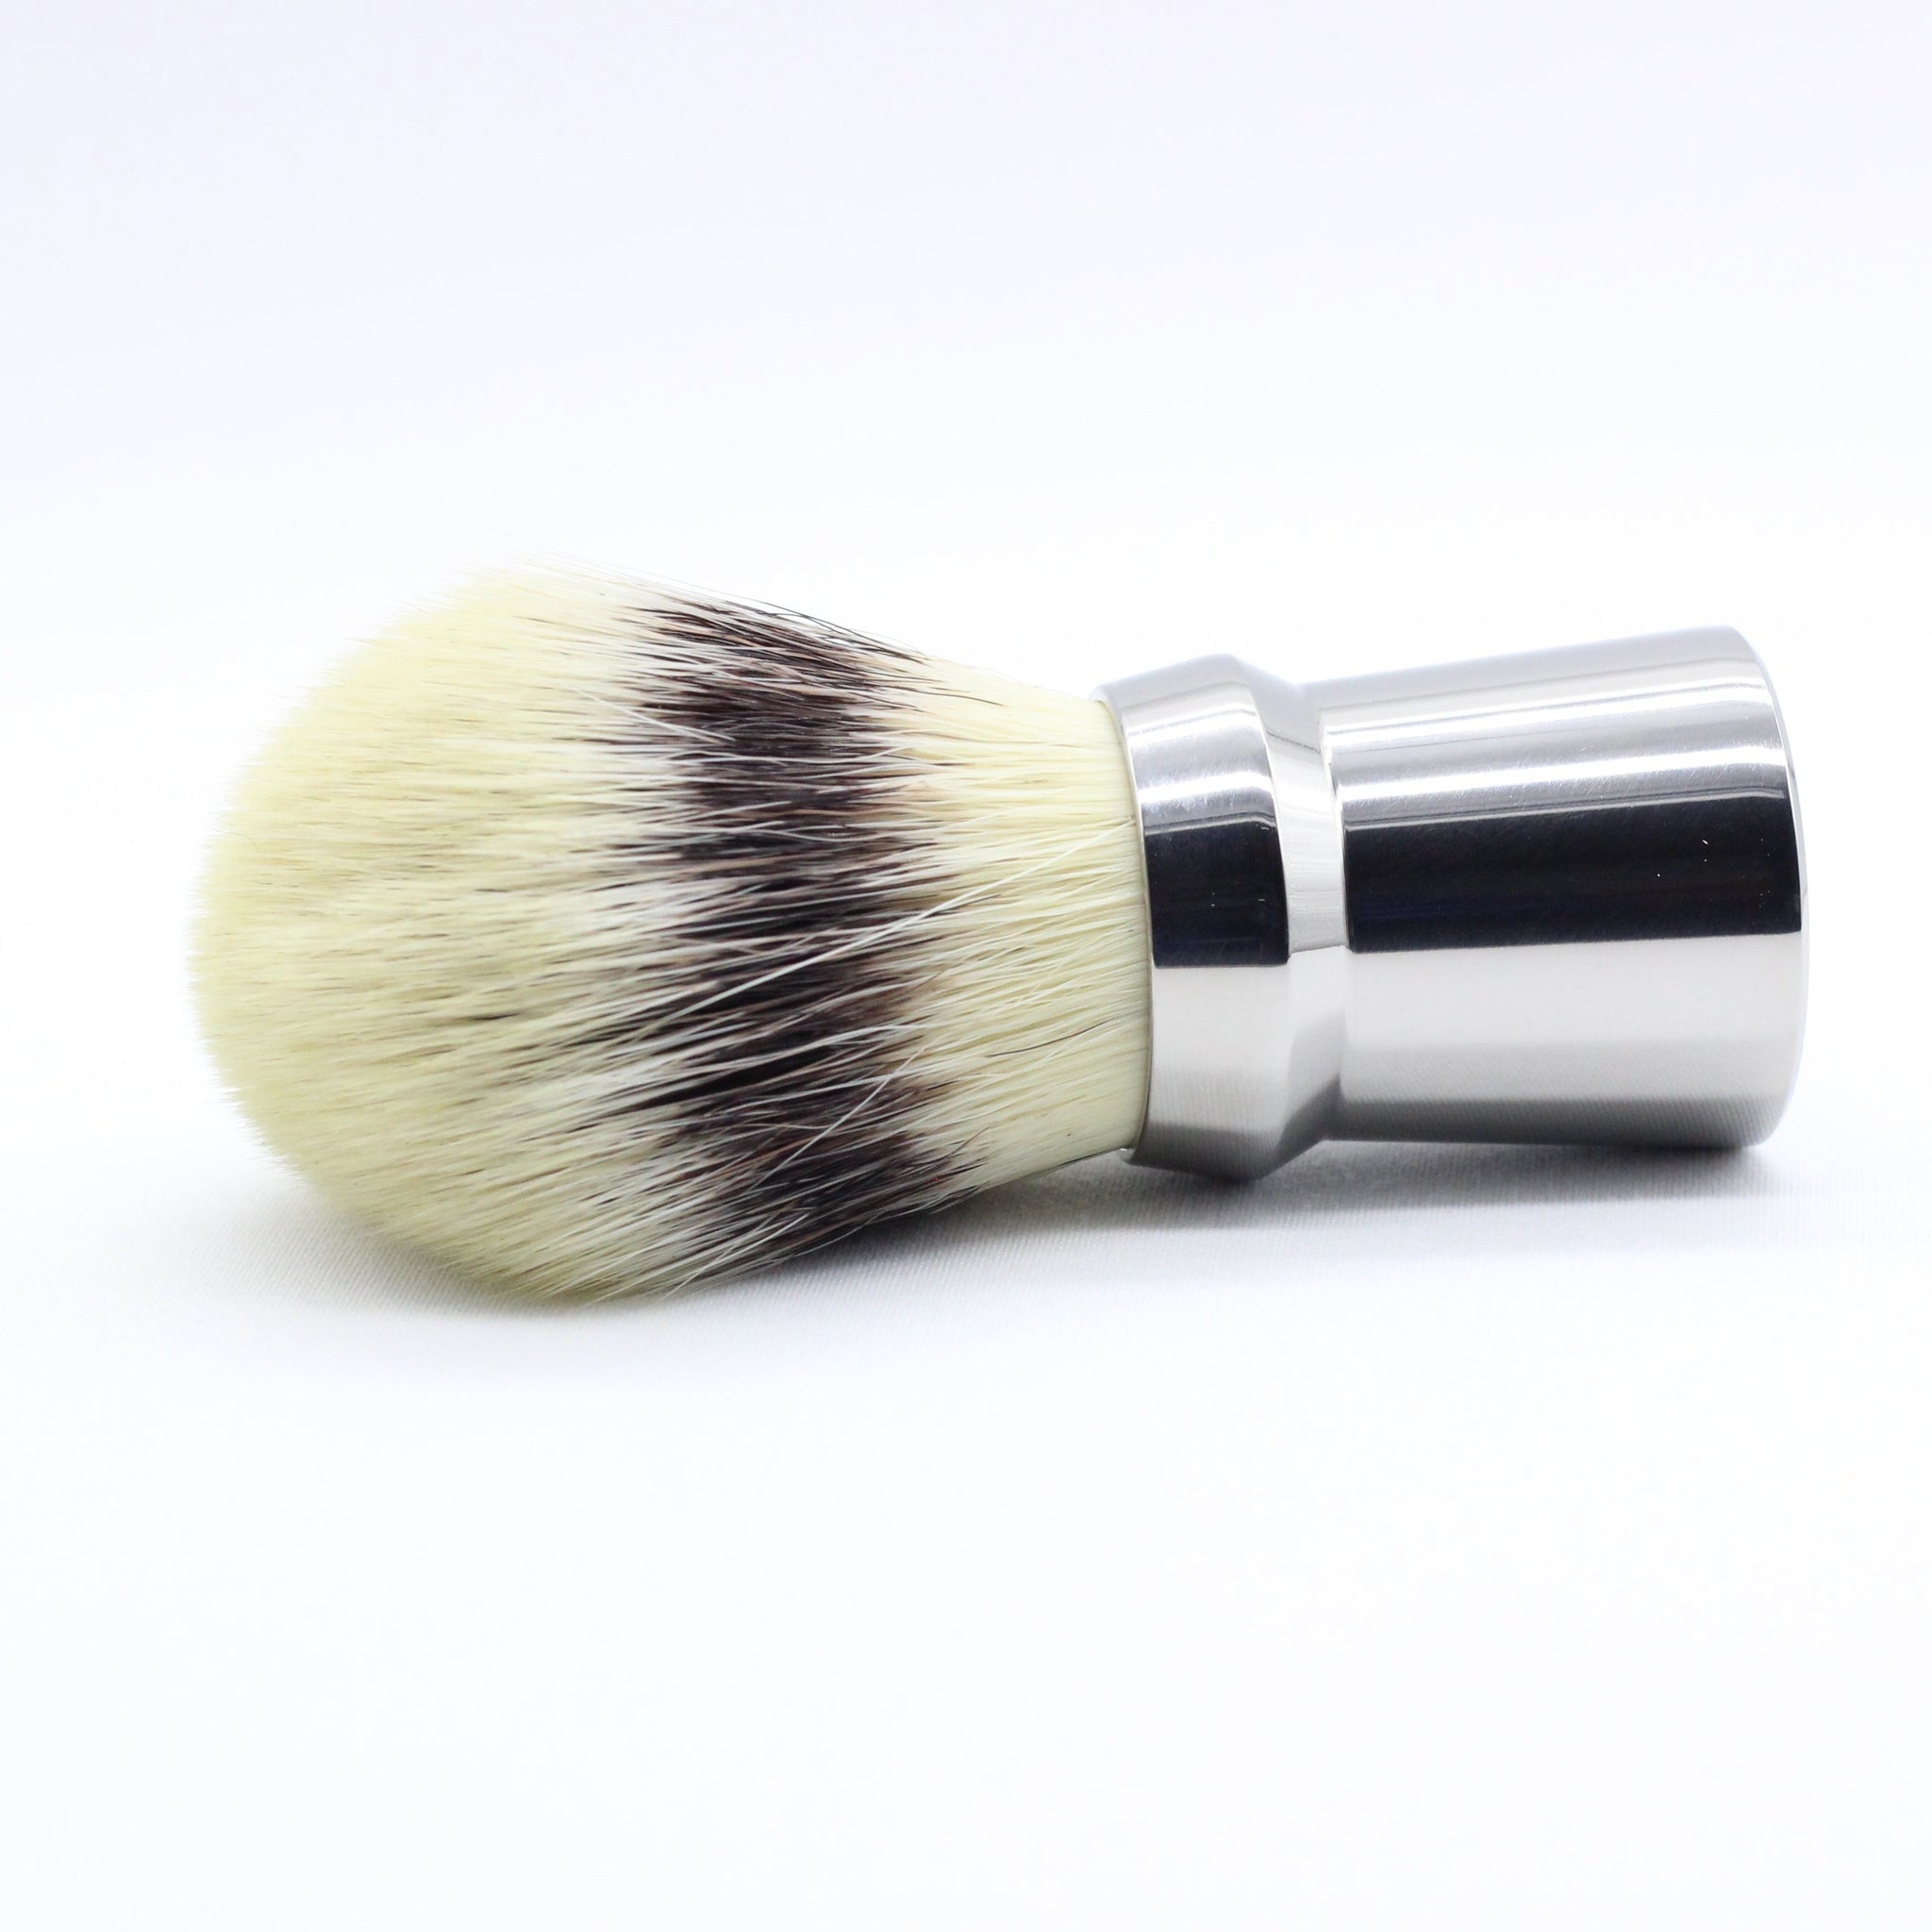 Horizontol view - Titanium Shaving brush - high polish finish to reduce places where dirt and bacteria can collect - Used to lift hairs and soften skin while shaving. Essential part of a grooming kit